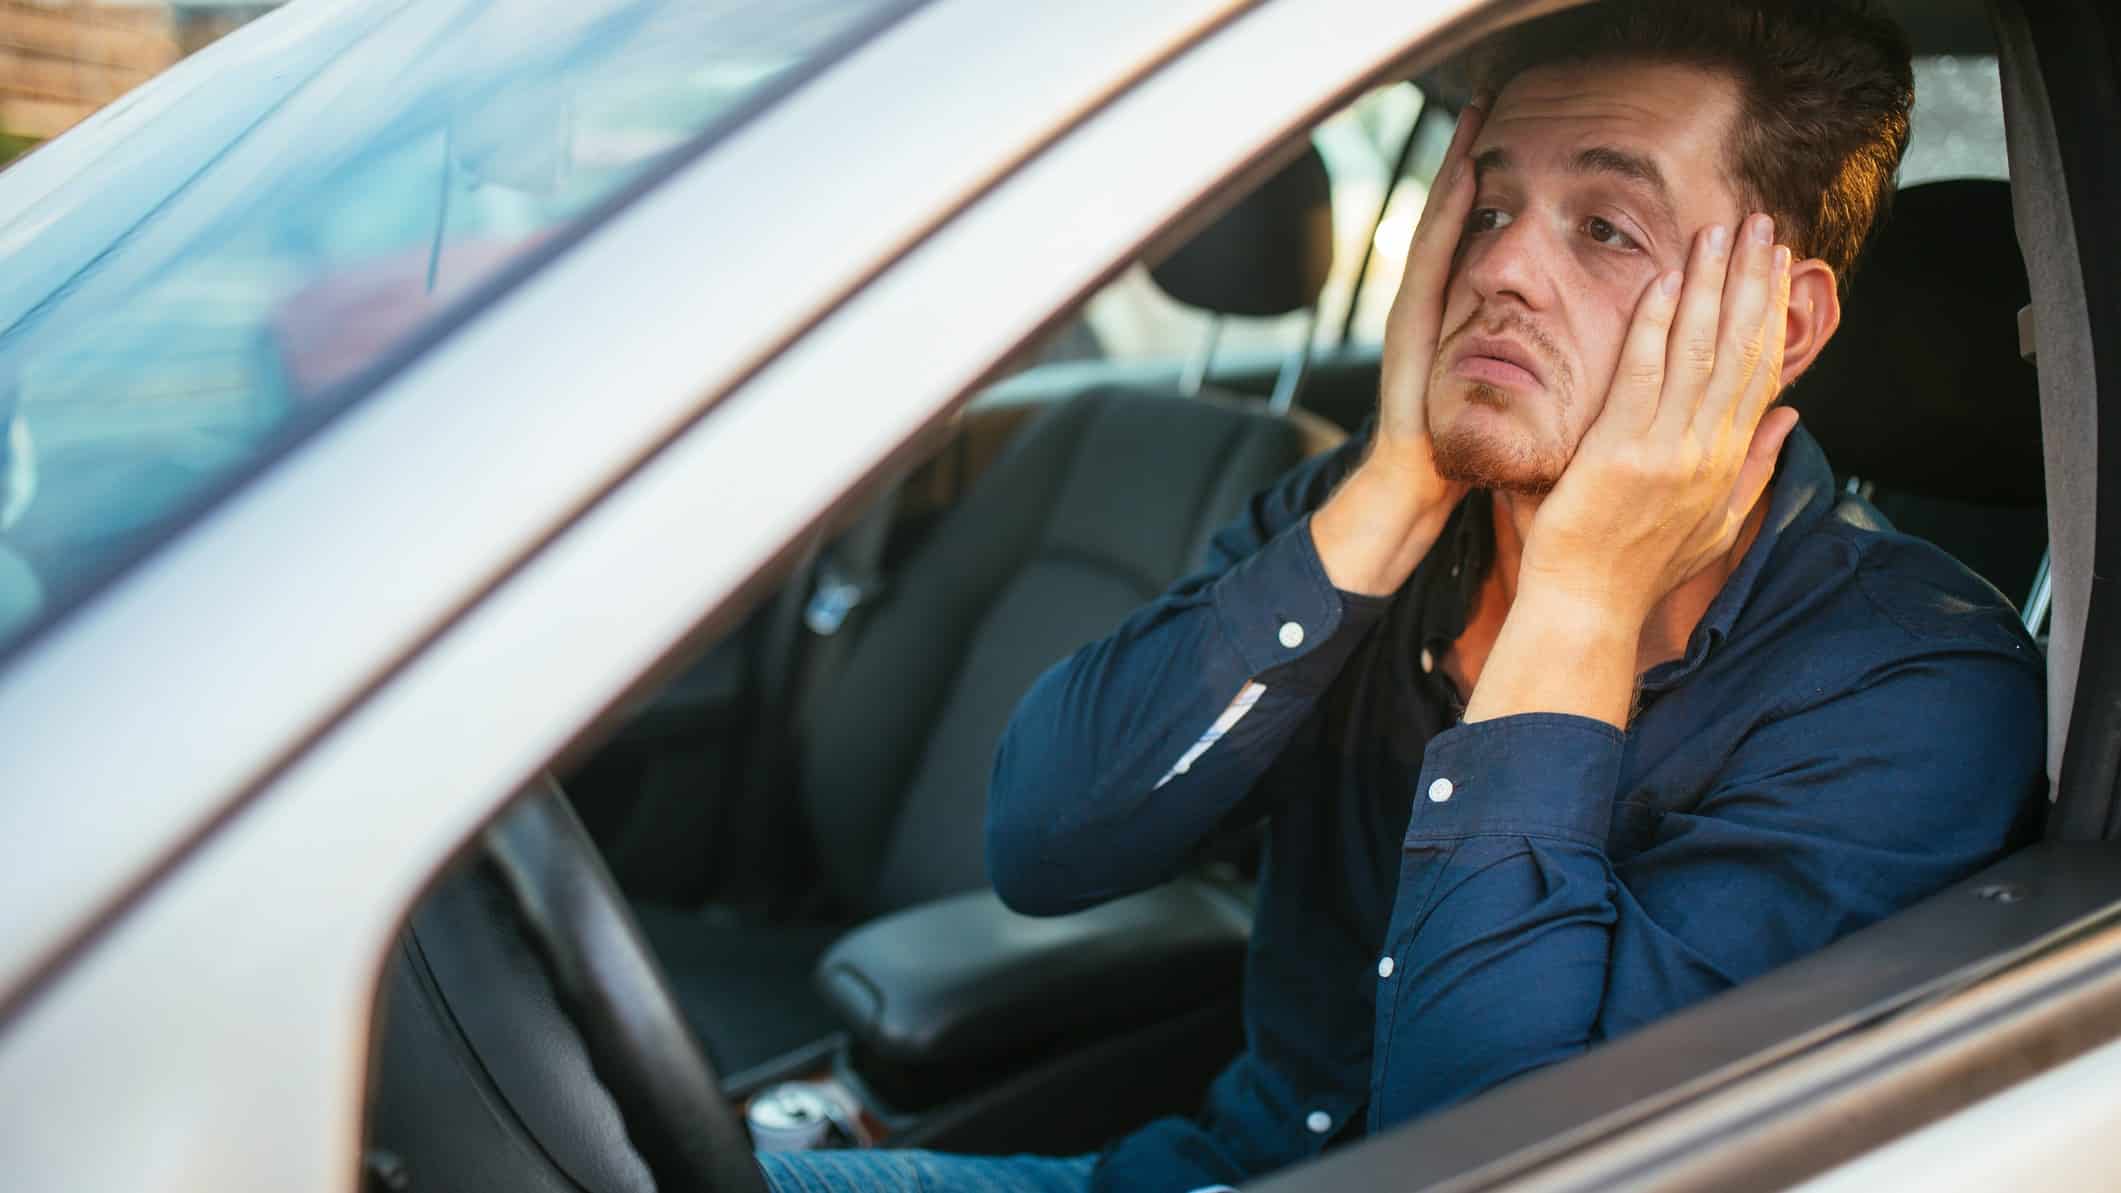 a man holds his hands to the sides of his face and pulls it down in despair as he sits at the wheel of a car that is not moving, as though in a traffic jam.